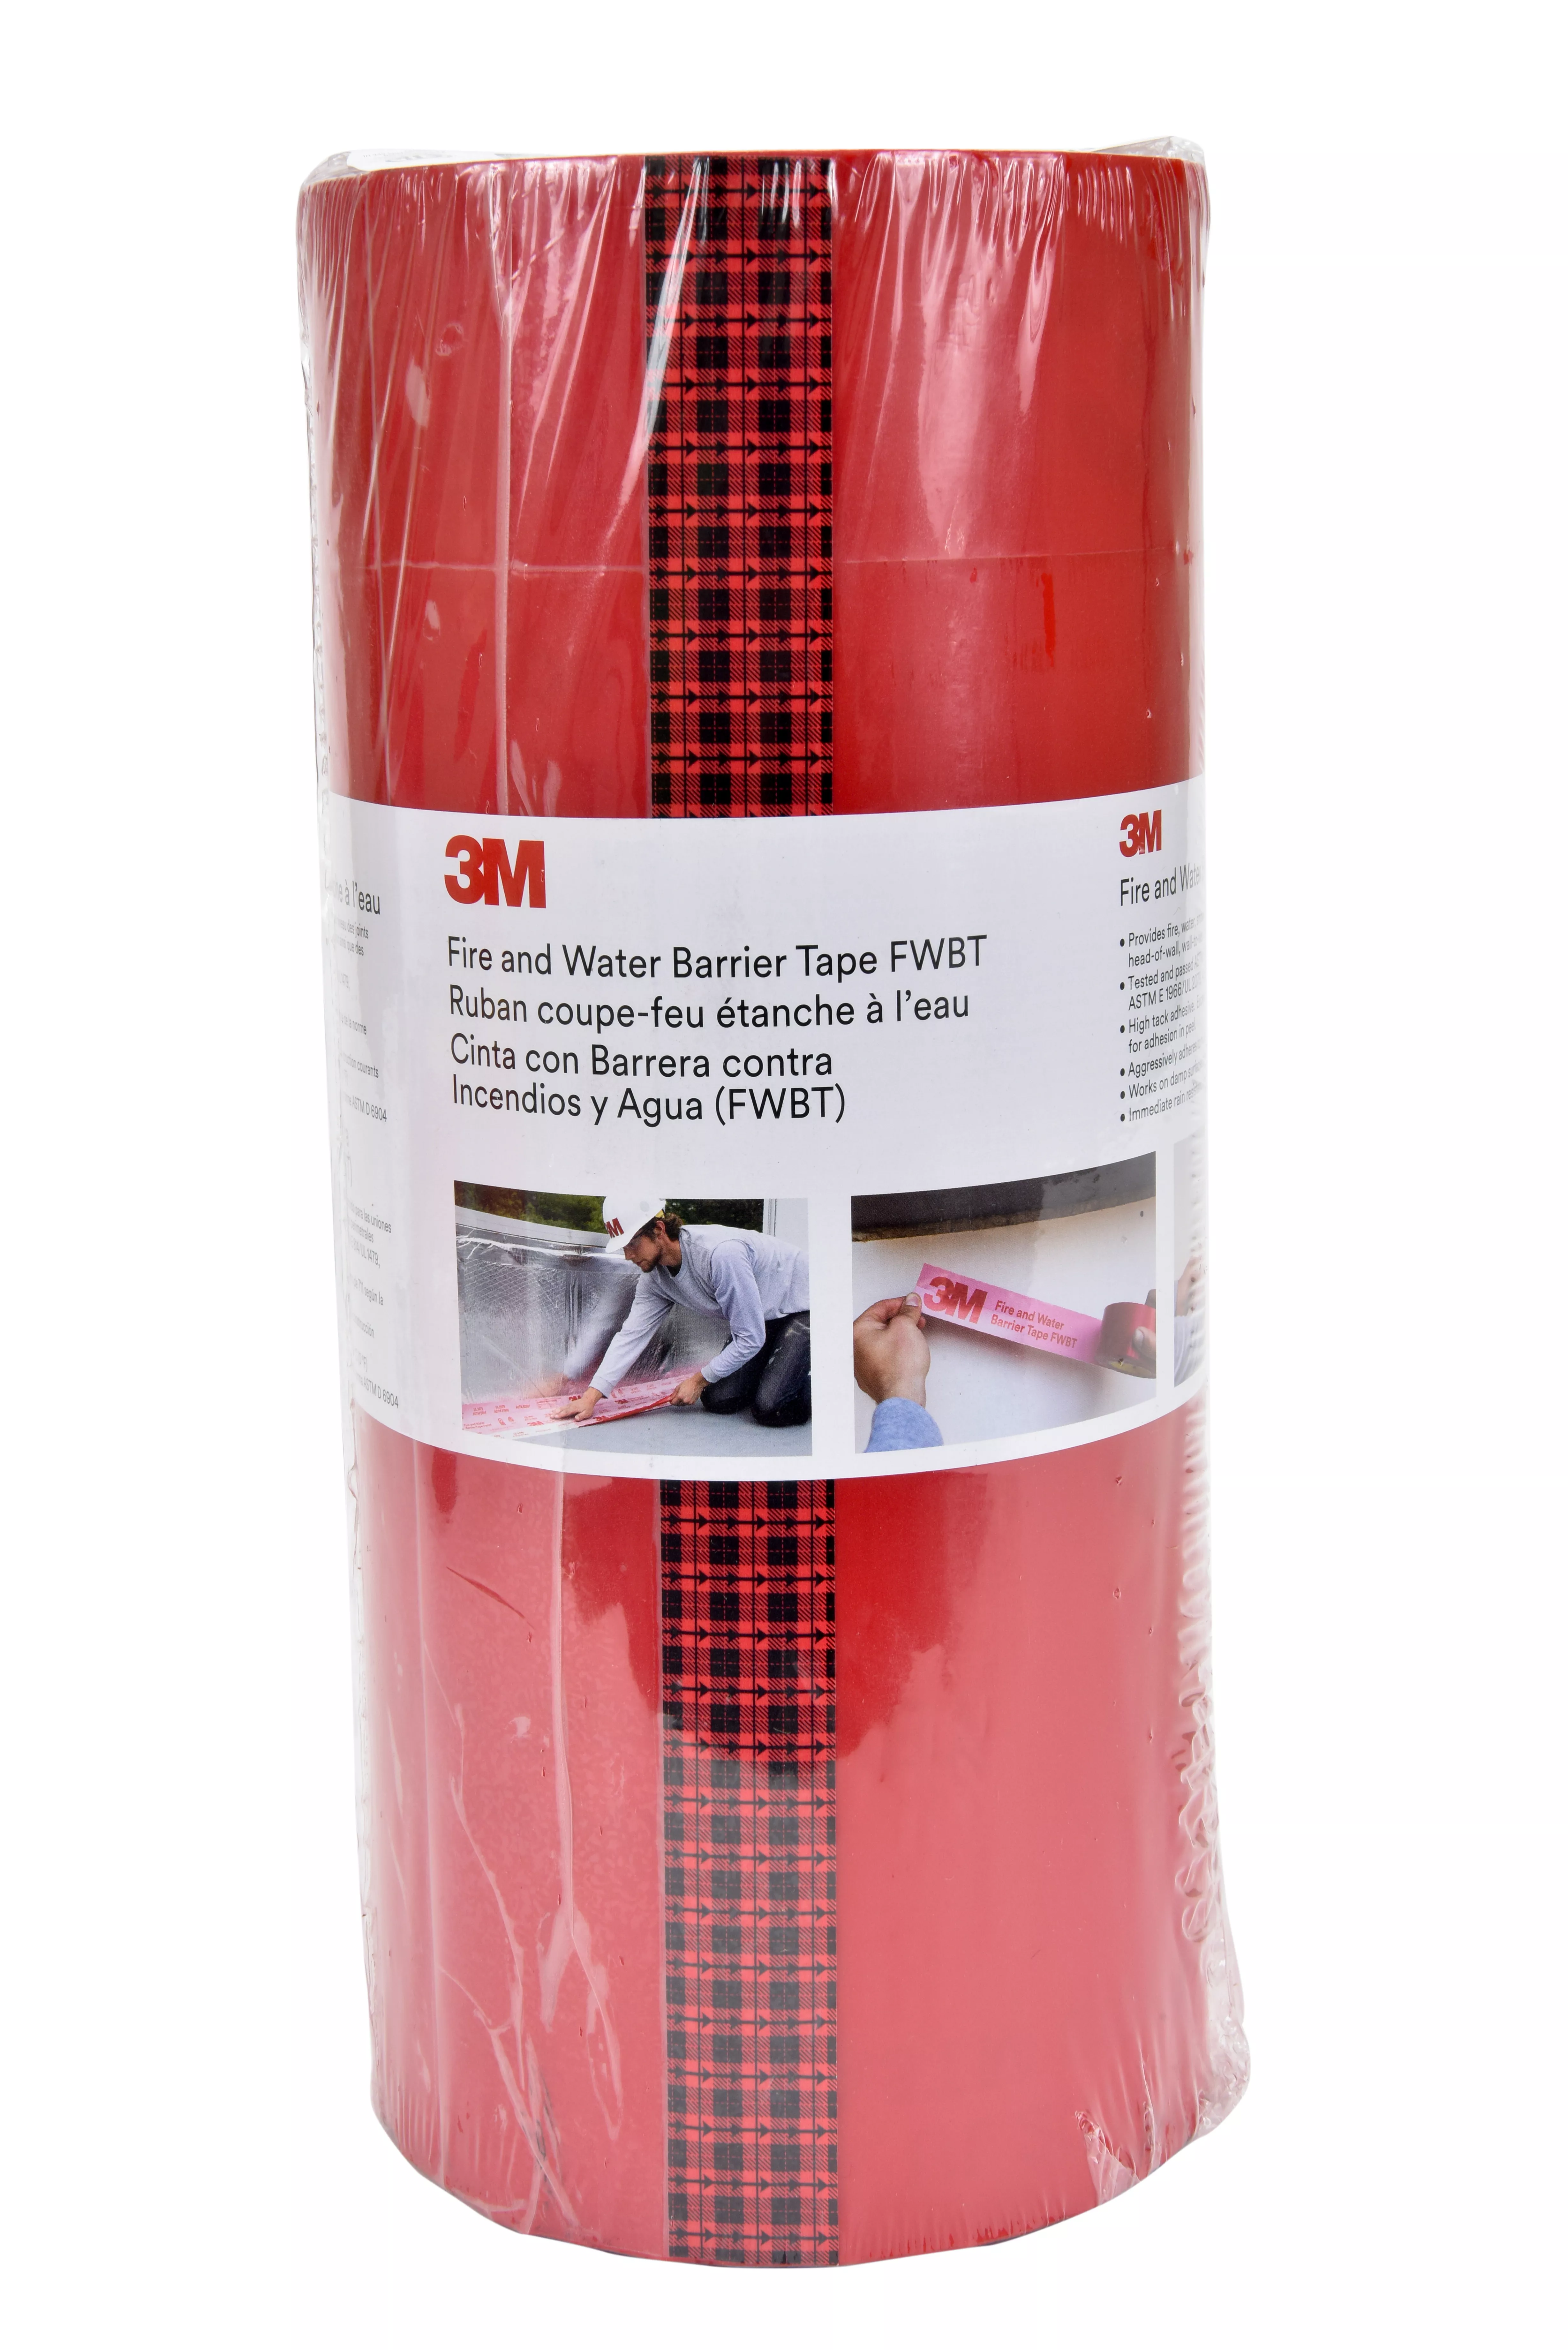 3M™ Fire and Water Barrier Tape FWBT12, Translucent, 12 in x 75 ft, 4
Each/Case